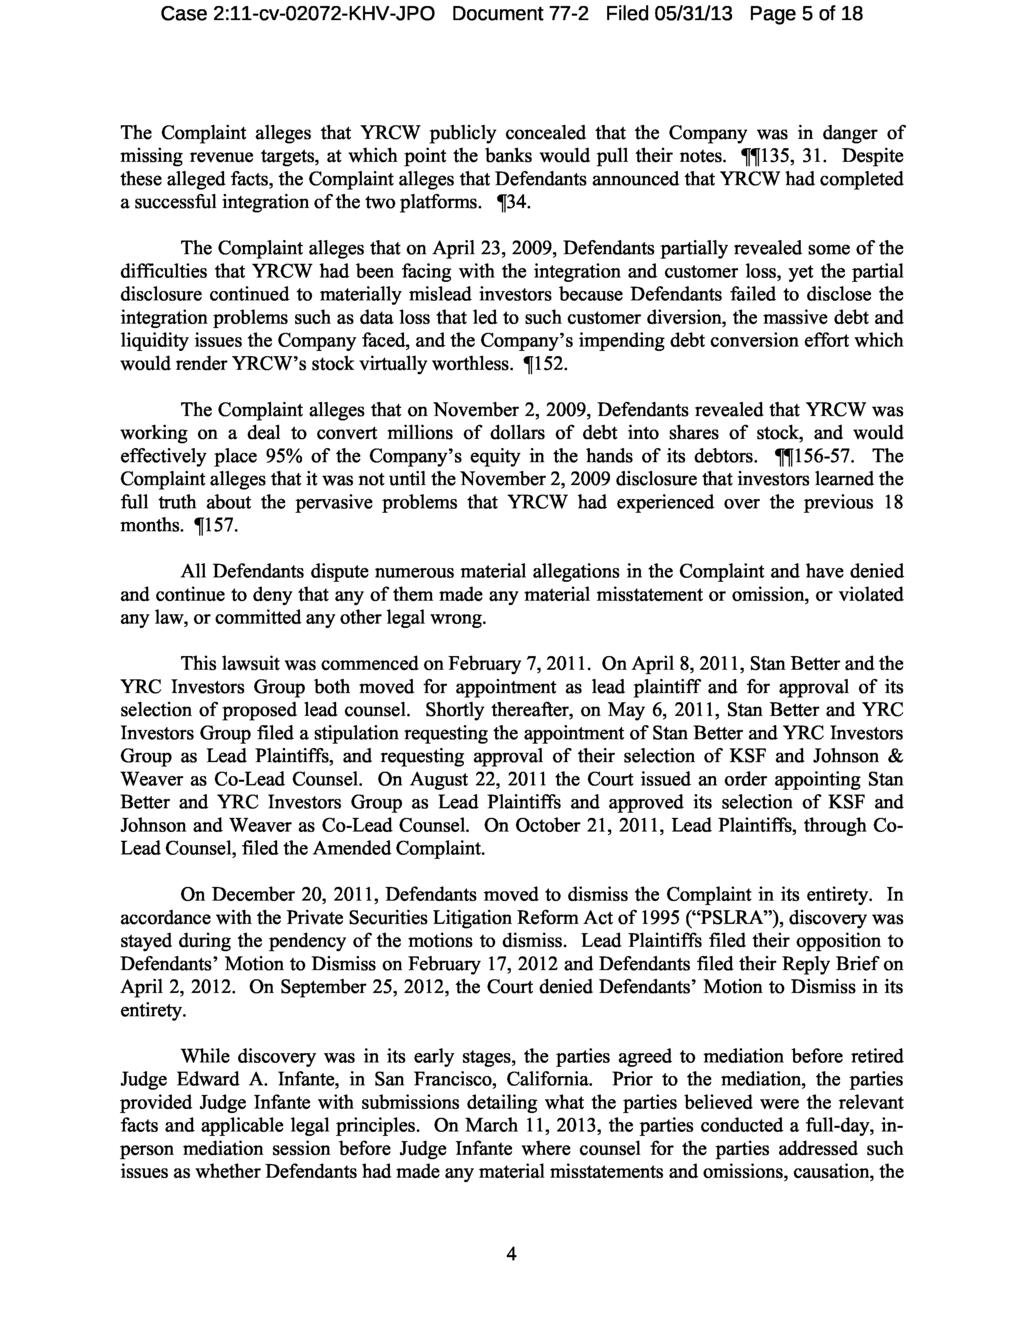 Case 2:11-cv-02072-KHV-JPO Document 77-2 Filed 05/31/13 Page 5 of 18 The Complaint alleges that YRCW publicly concealed that the Company was in danger of missing revenue targets, at which point the